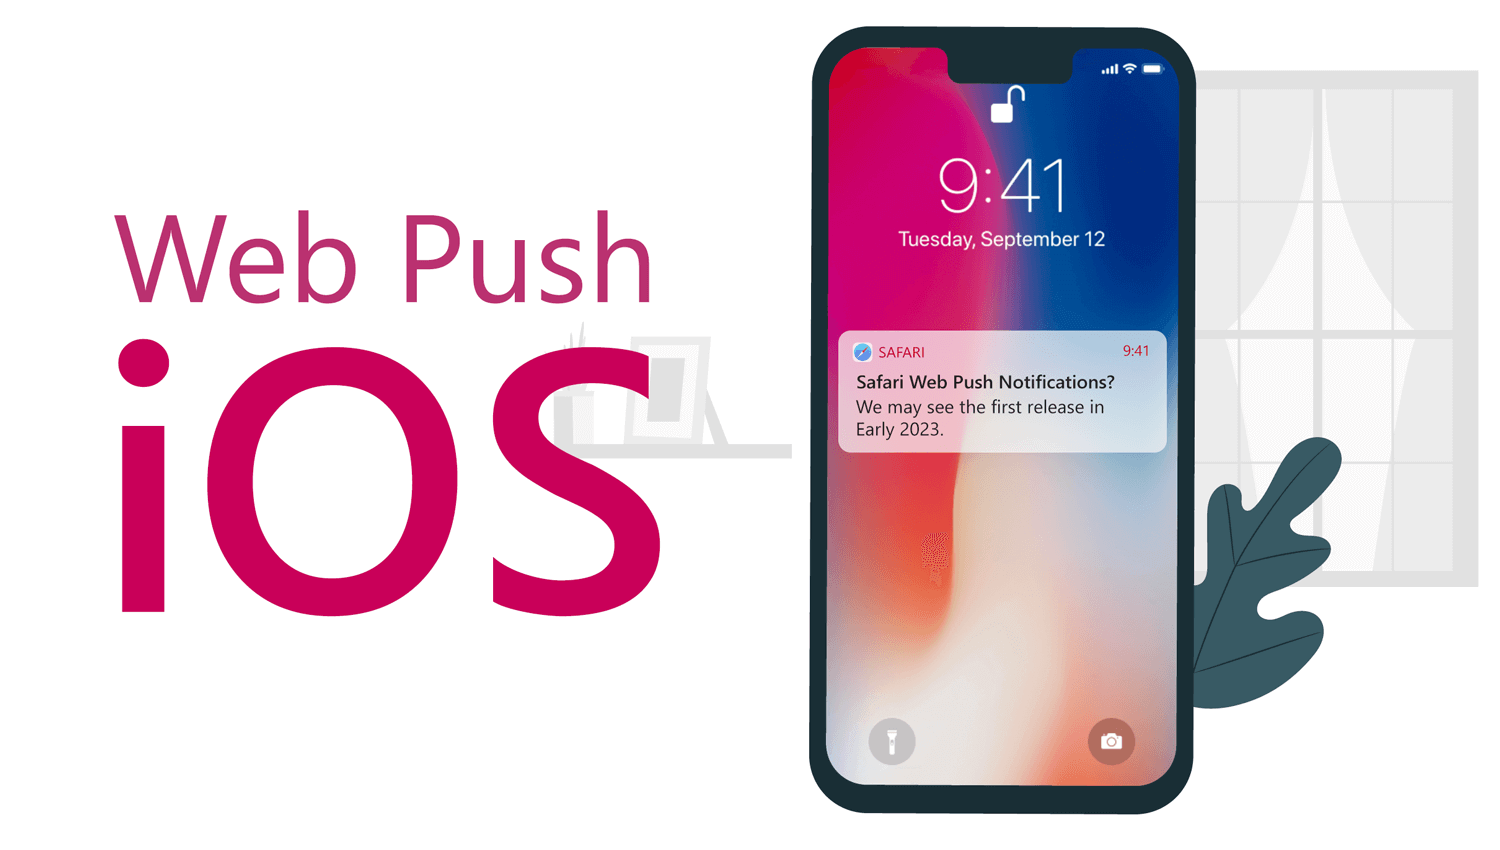 Mobile Web Push Notifications on iOS